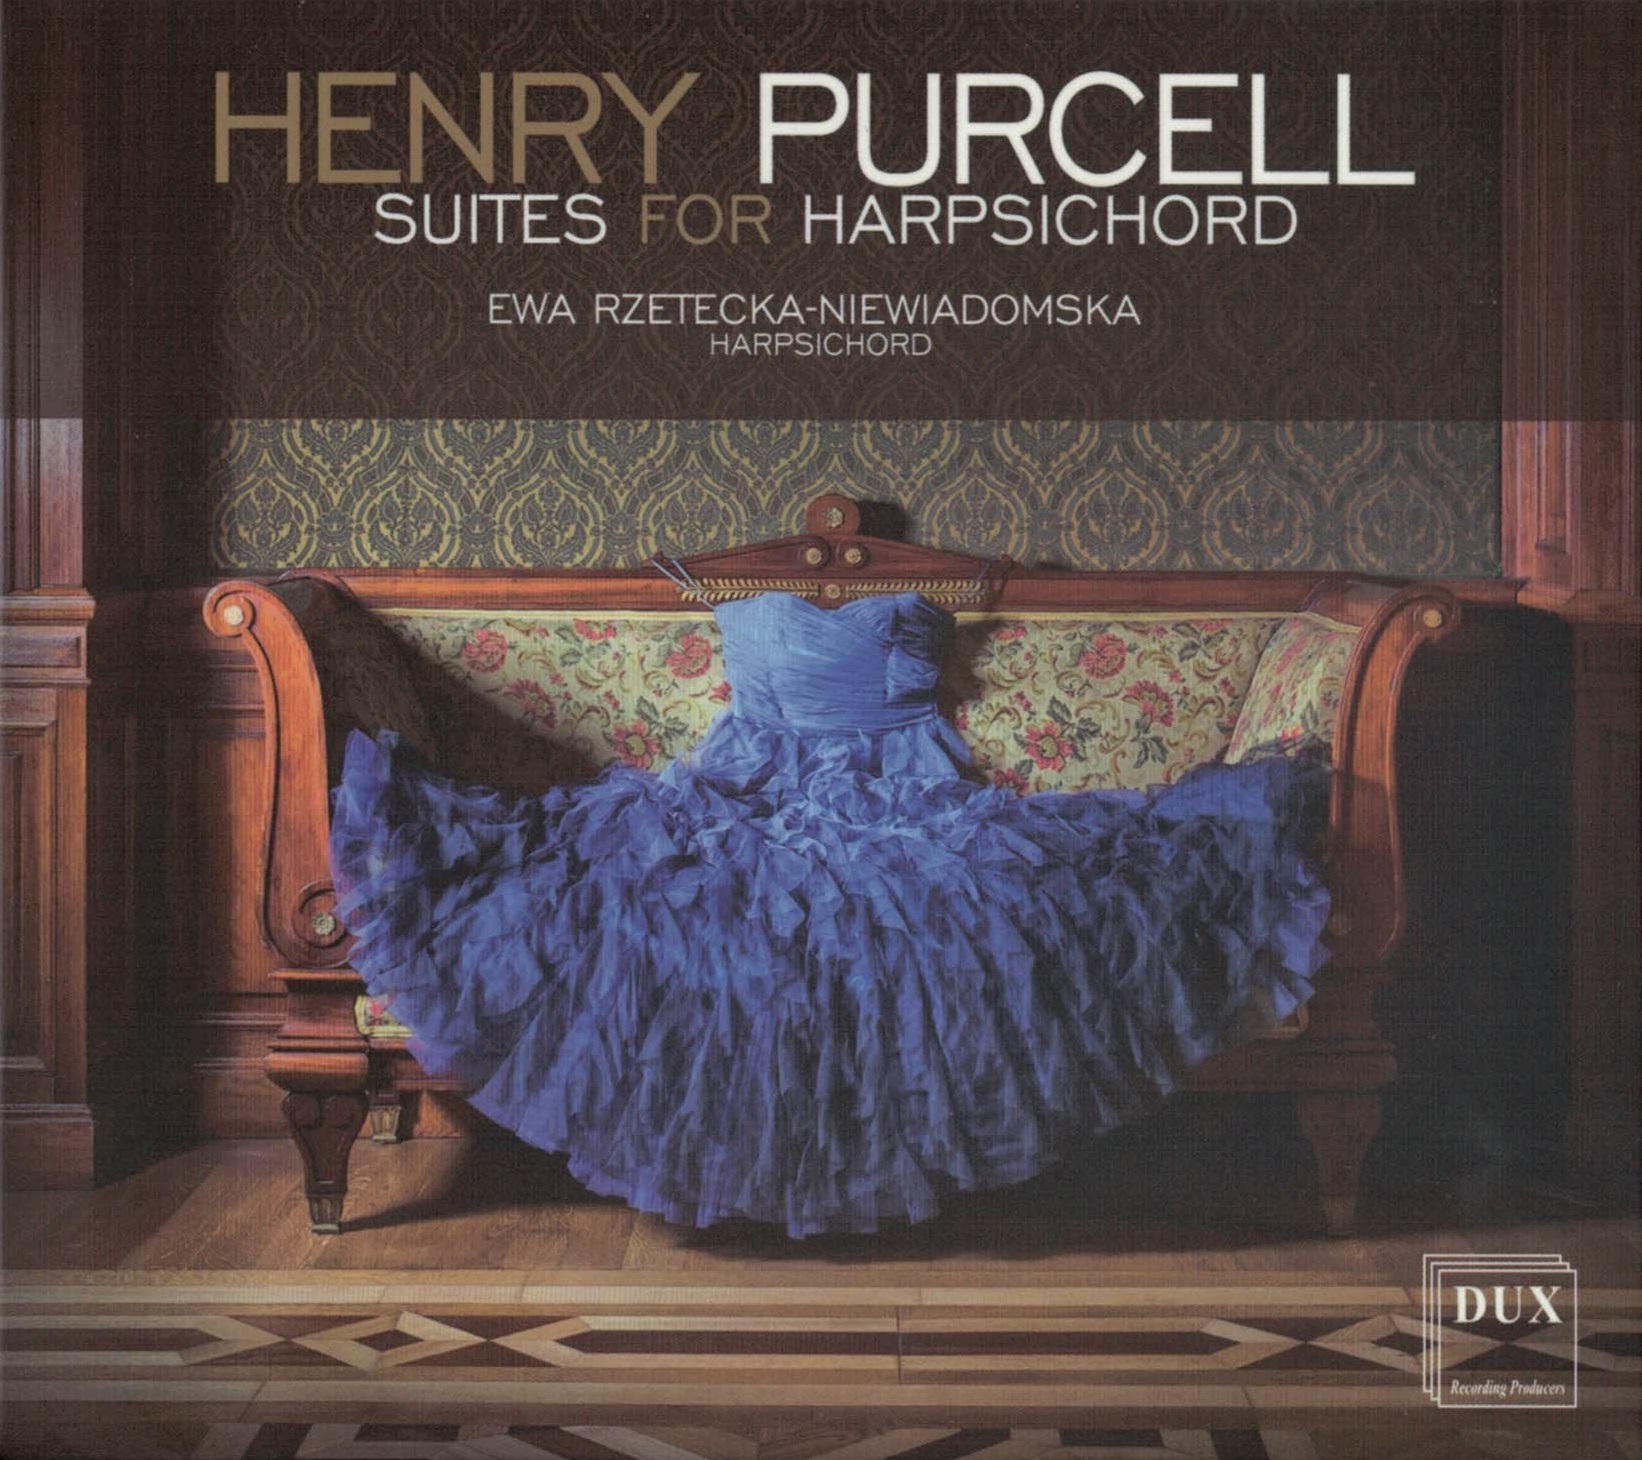 Henry Purcell – Suites for Harpsichord